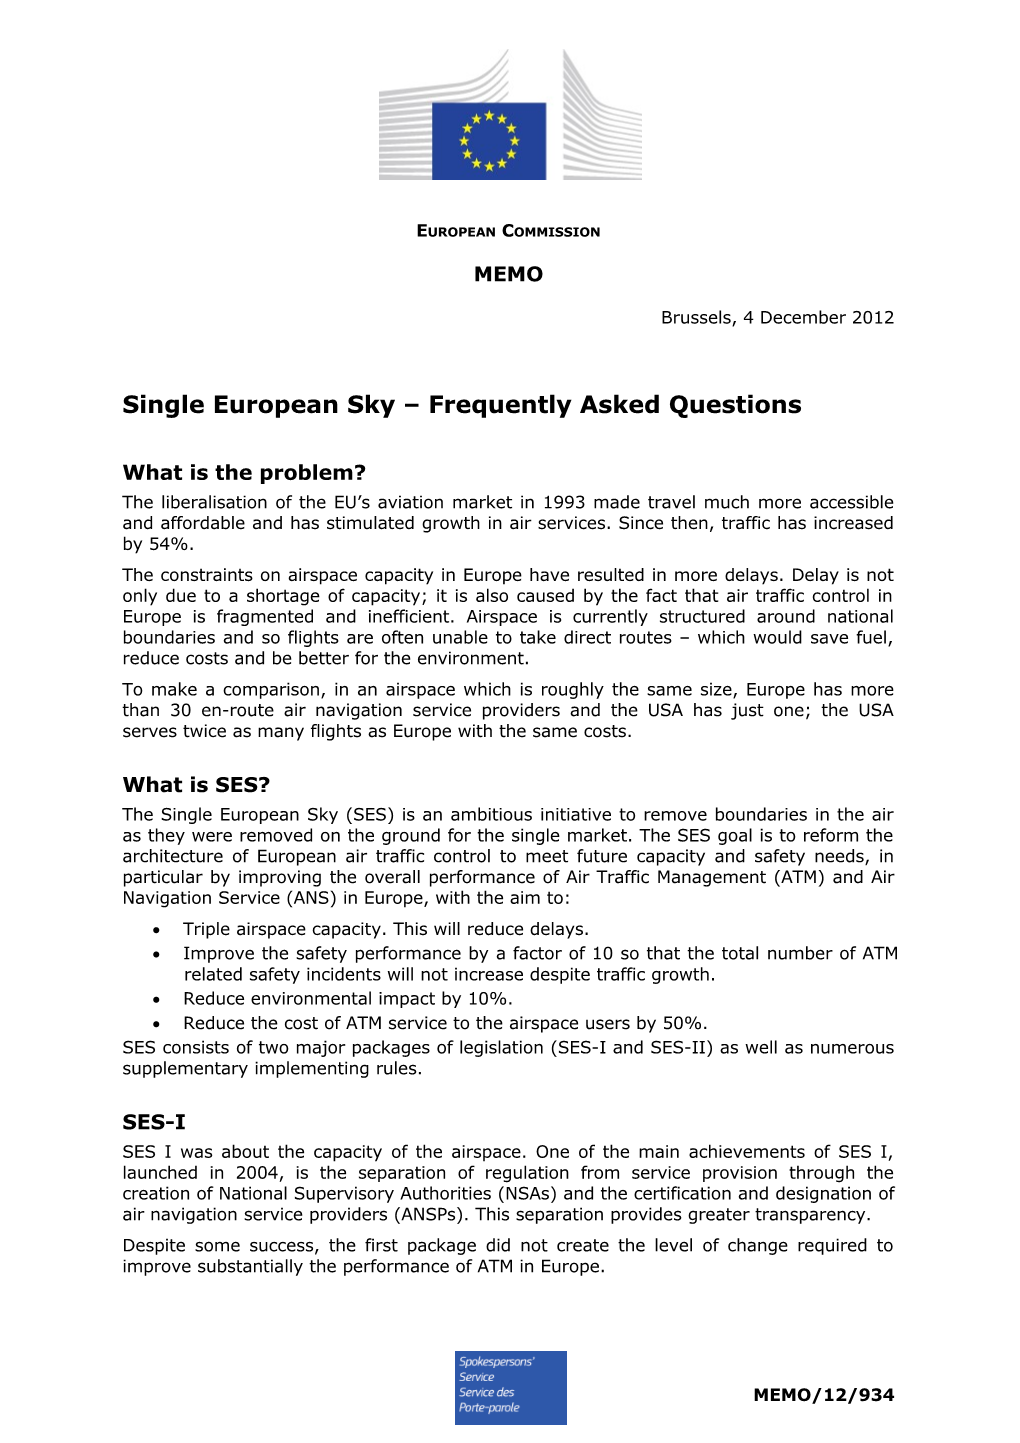 Single European Sky Frequently Asked Questions